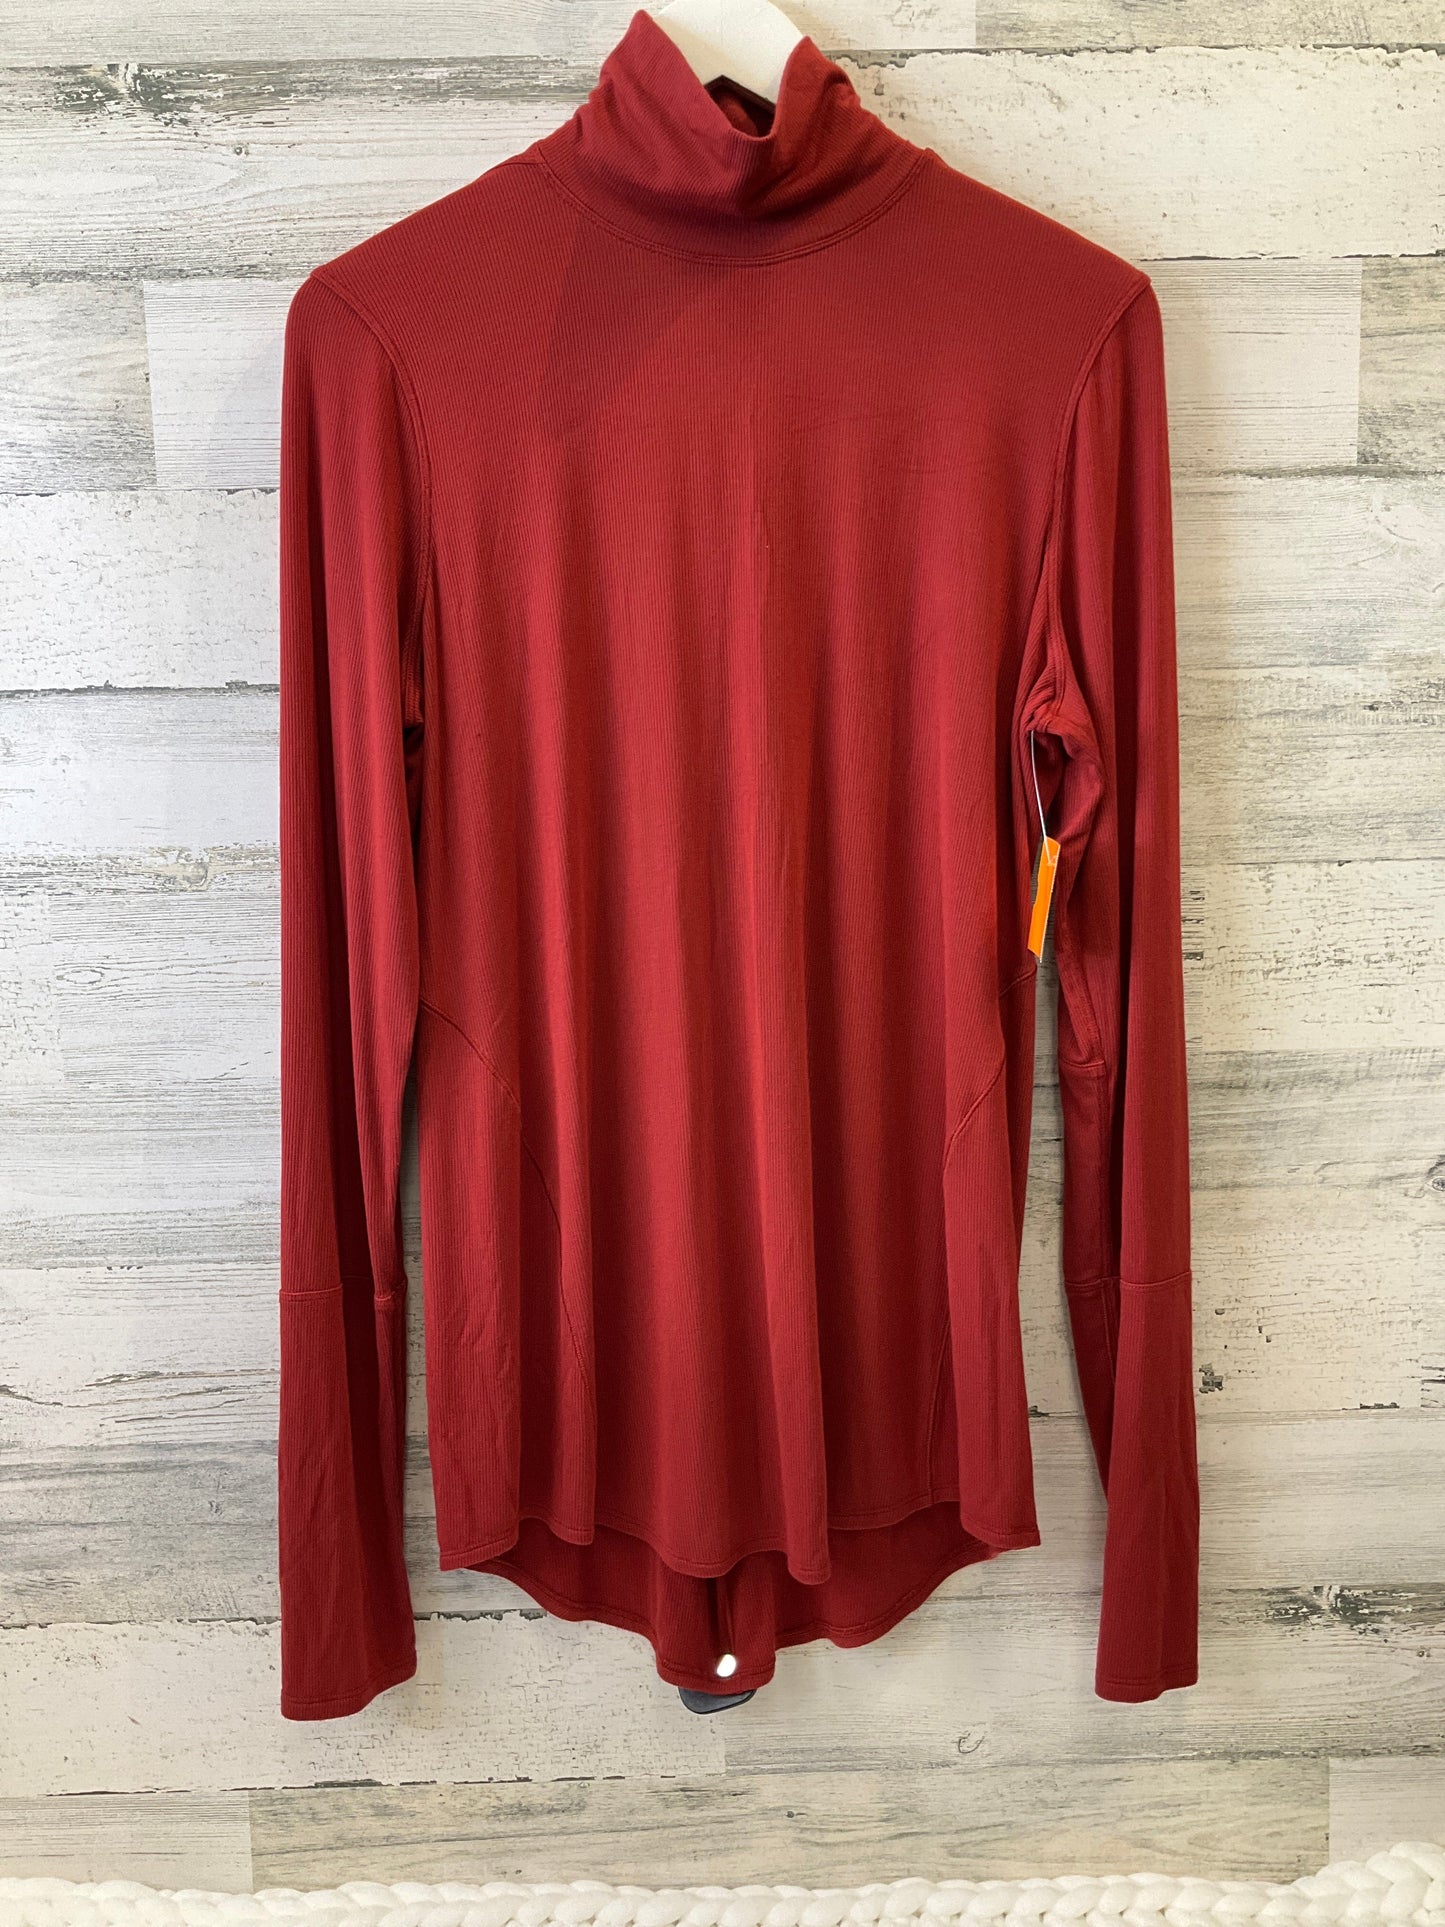 Athletic Top Long Sleeve Collar By Lululemon  Size: Xl